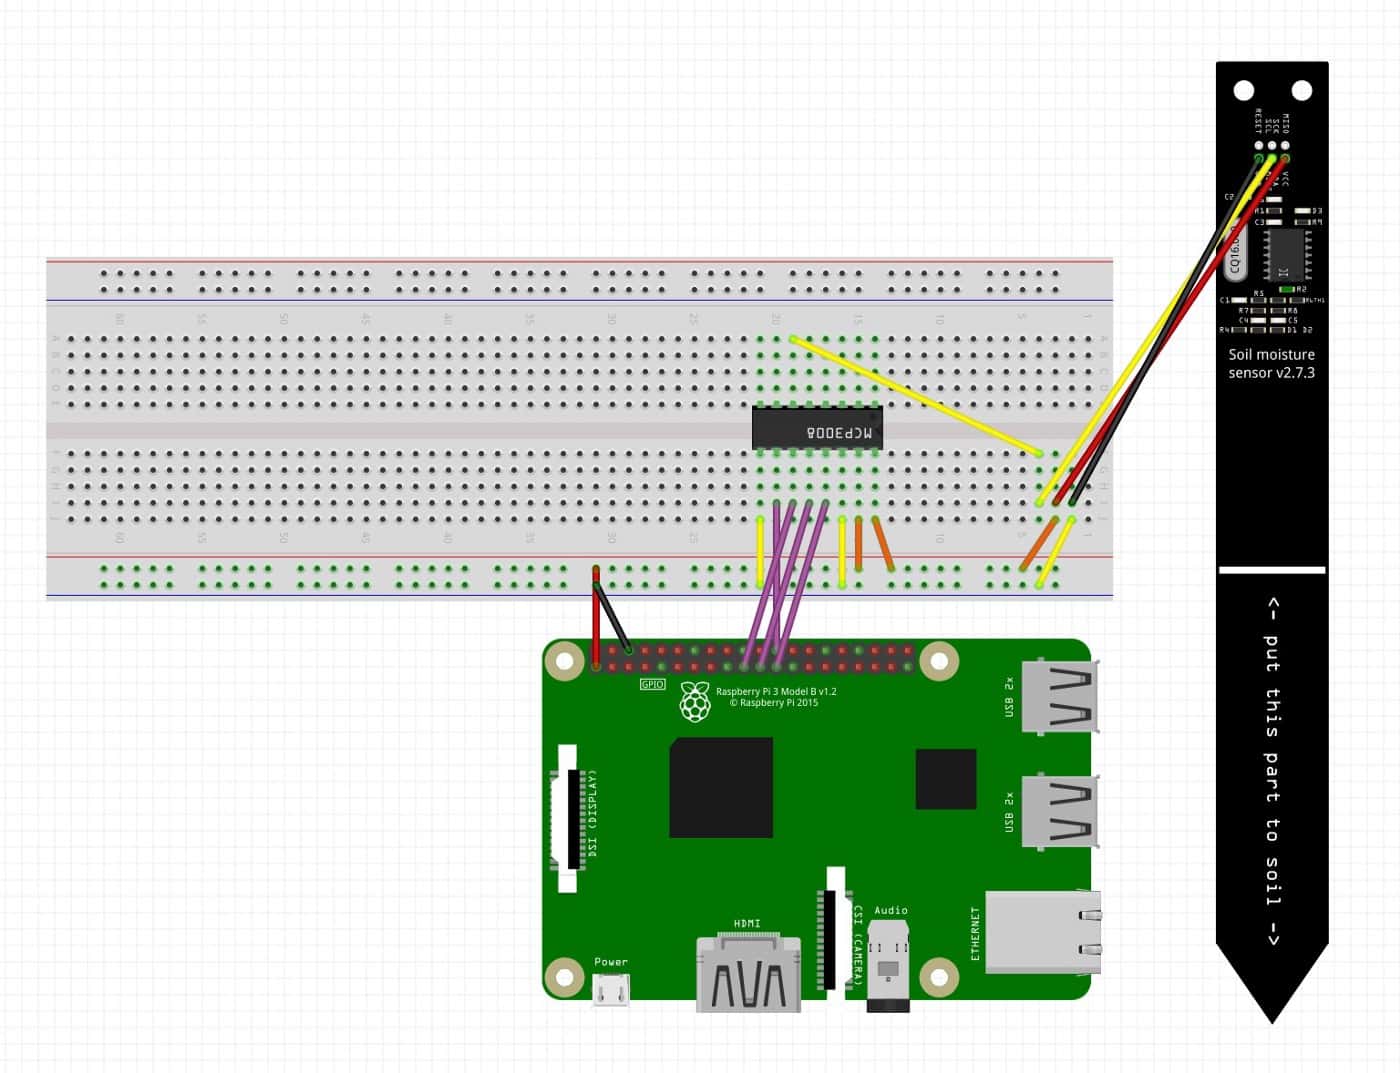 Connecting the soil moisture sensor to the MCP3008 ADC